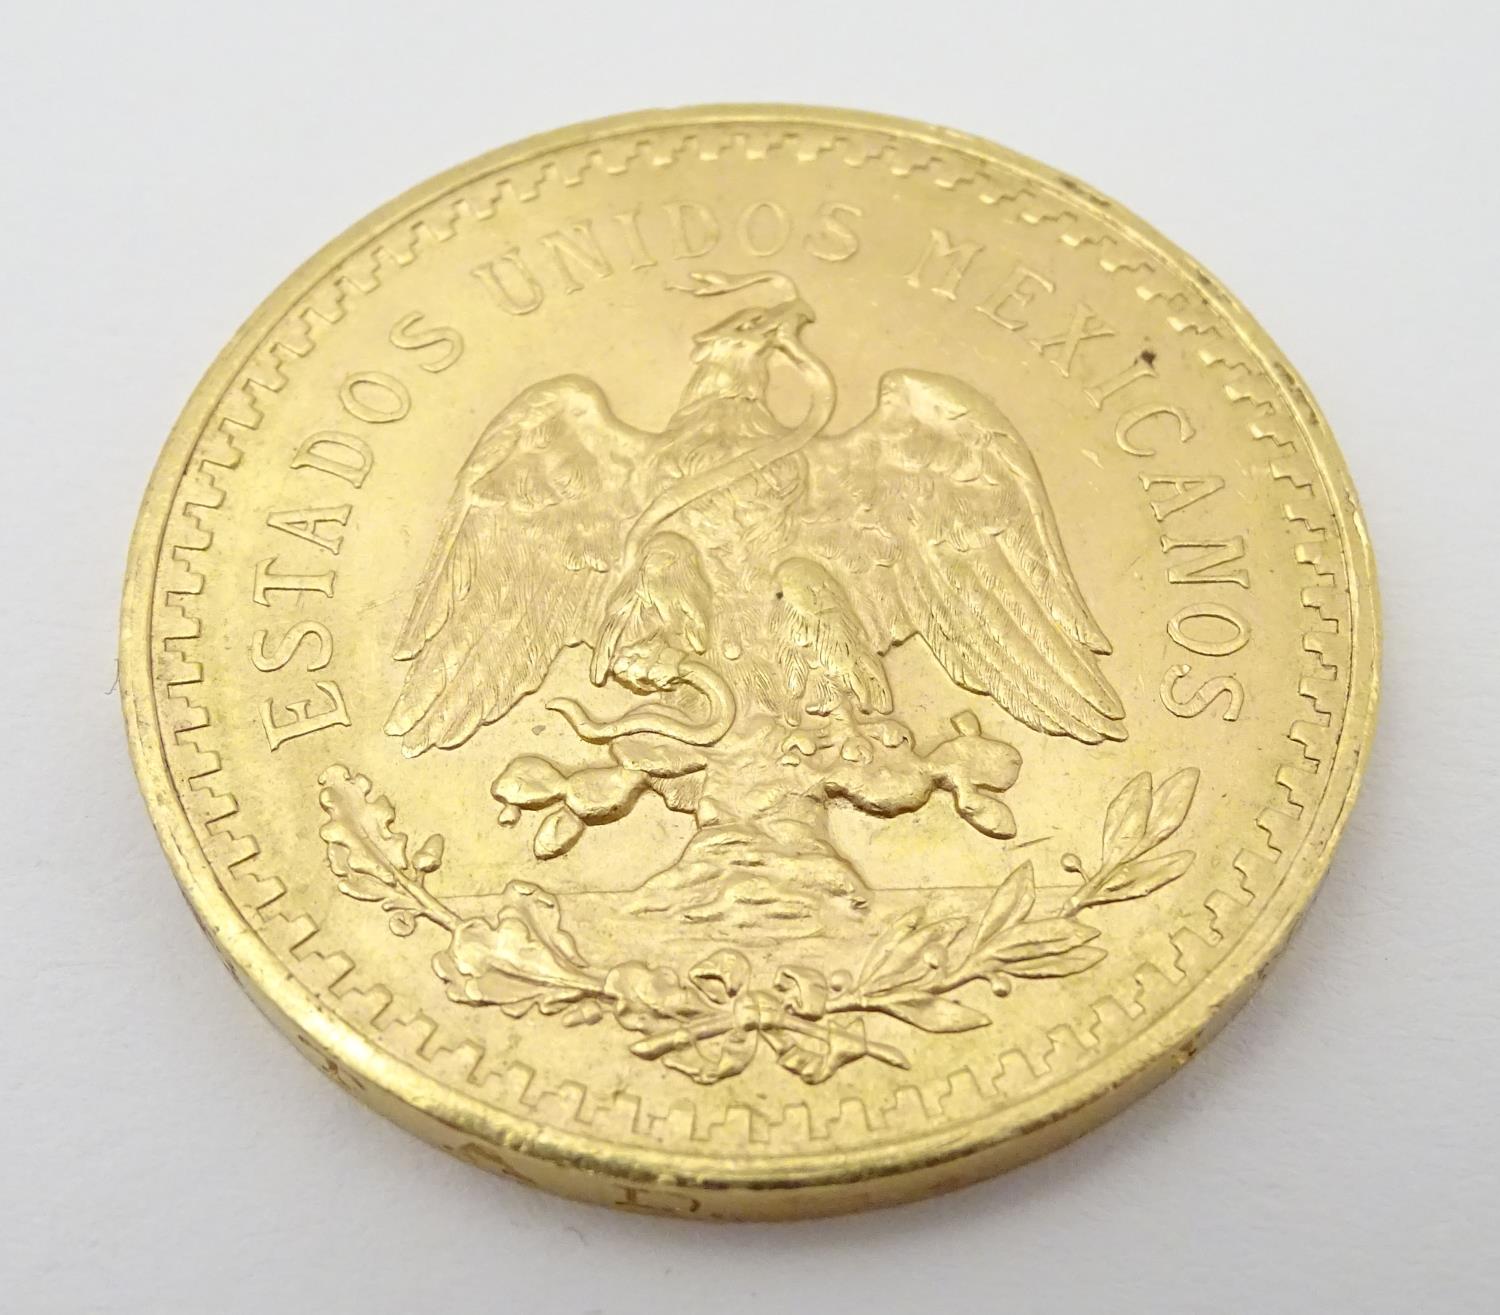 A 1943 gold 50 pesos coin commemorating Mexico's 100th anniversary of independence from Spain. The - Image 7 of 10